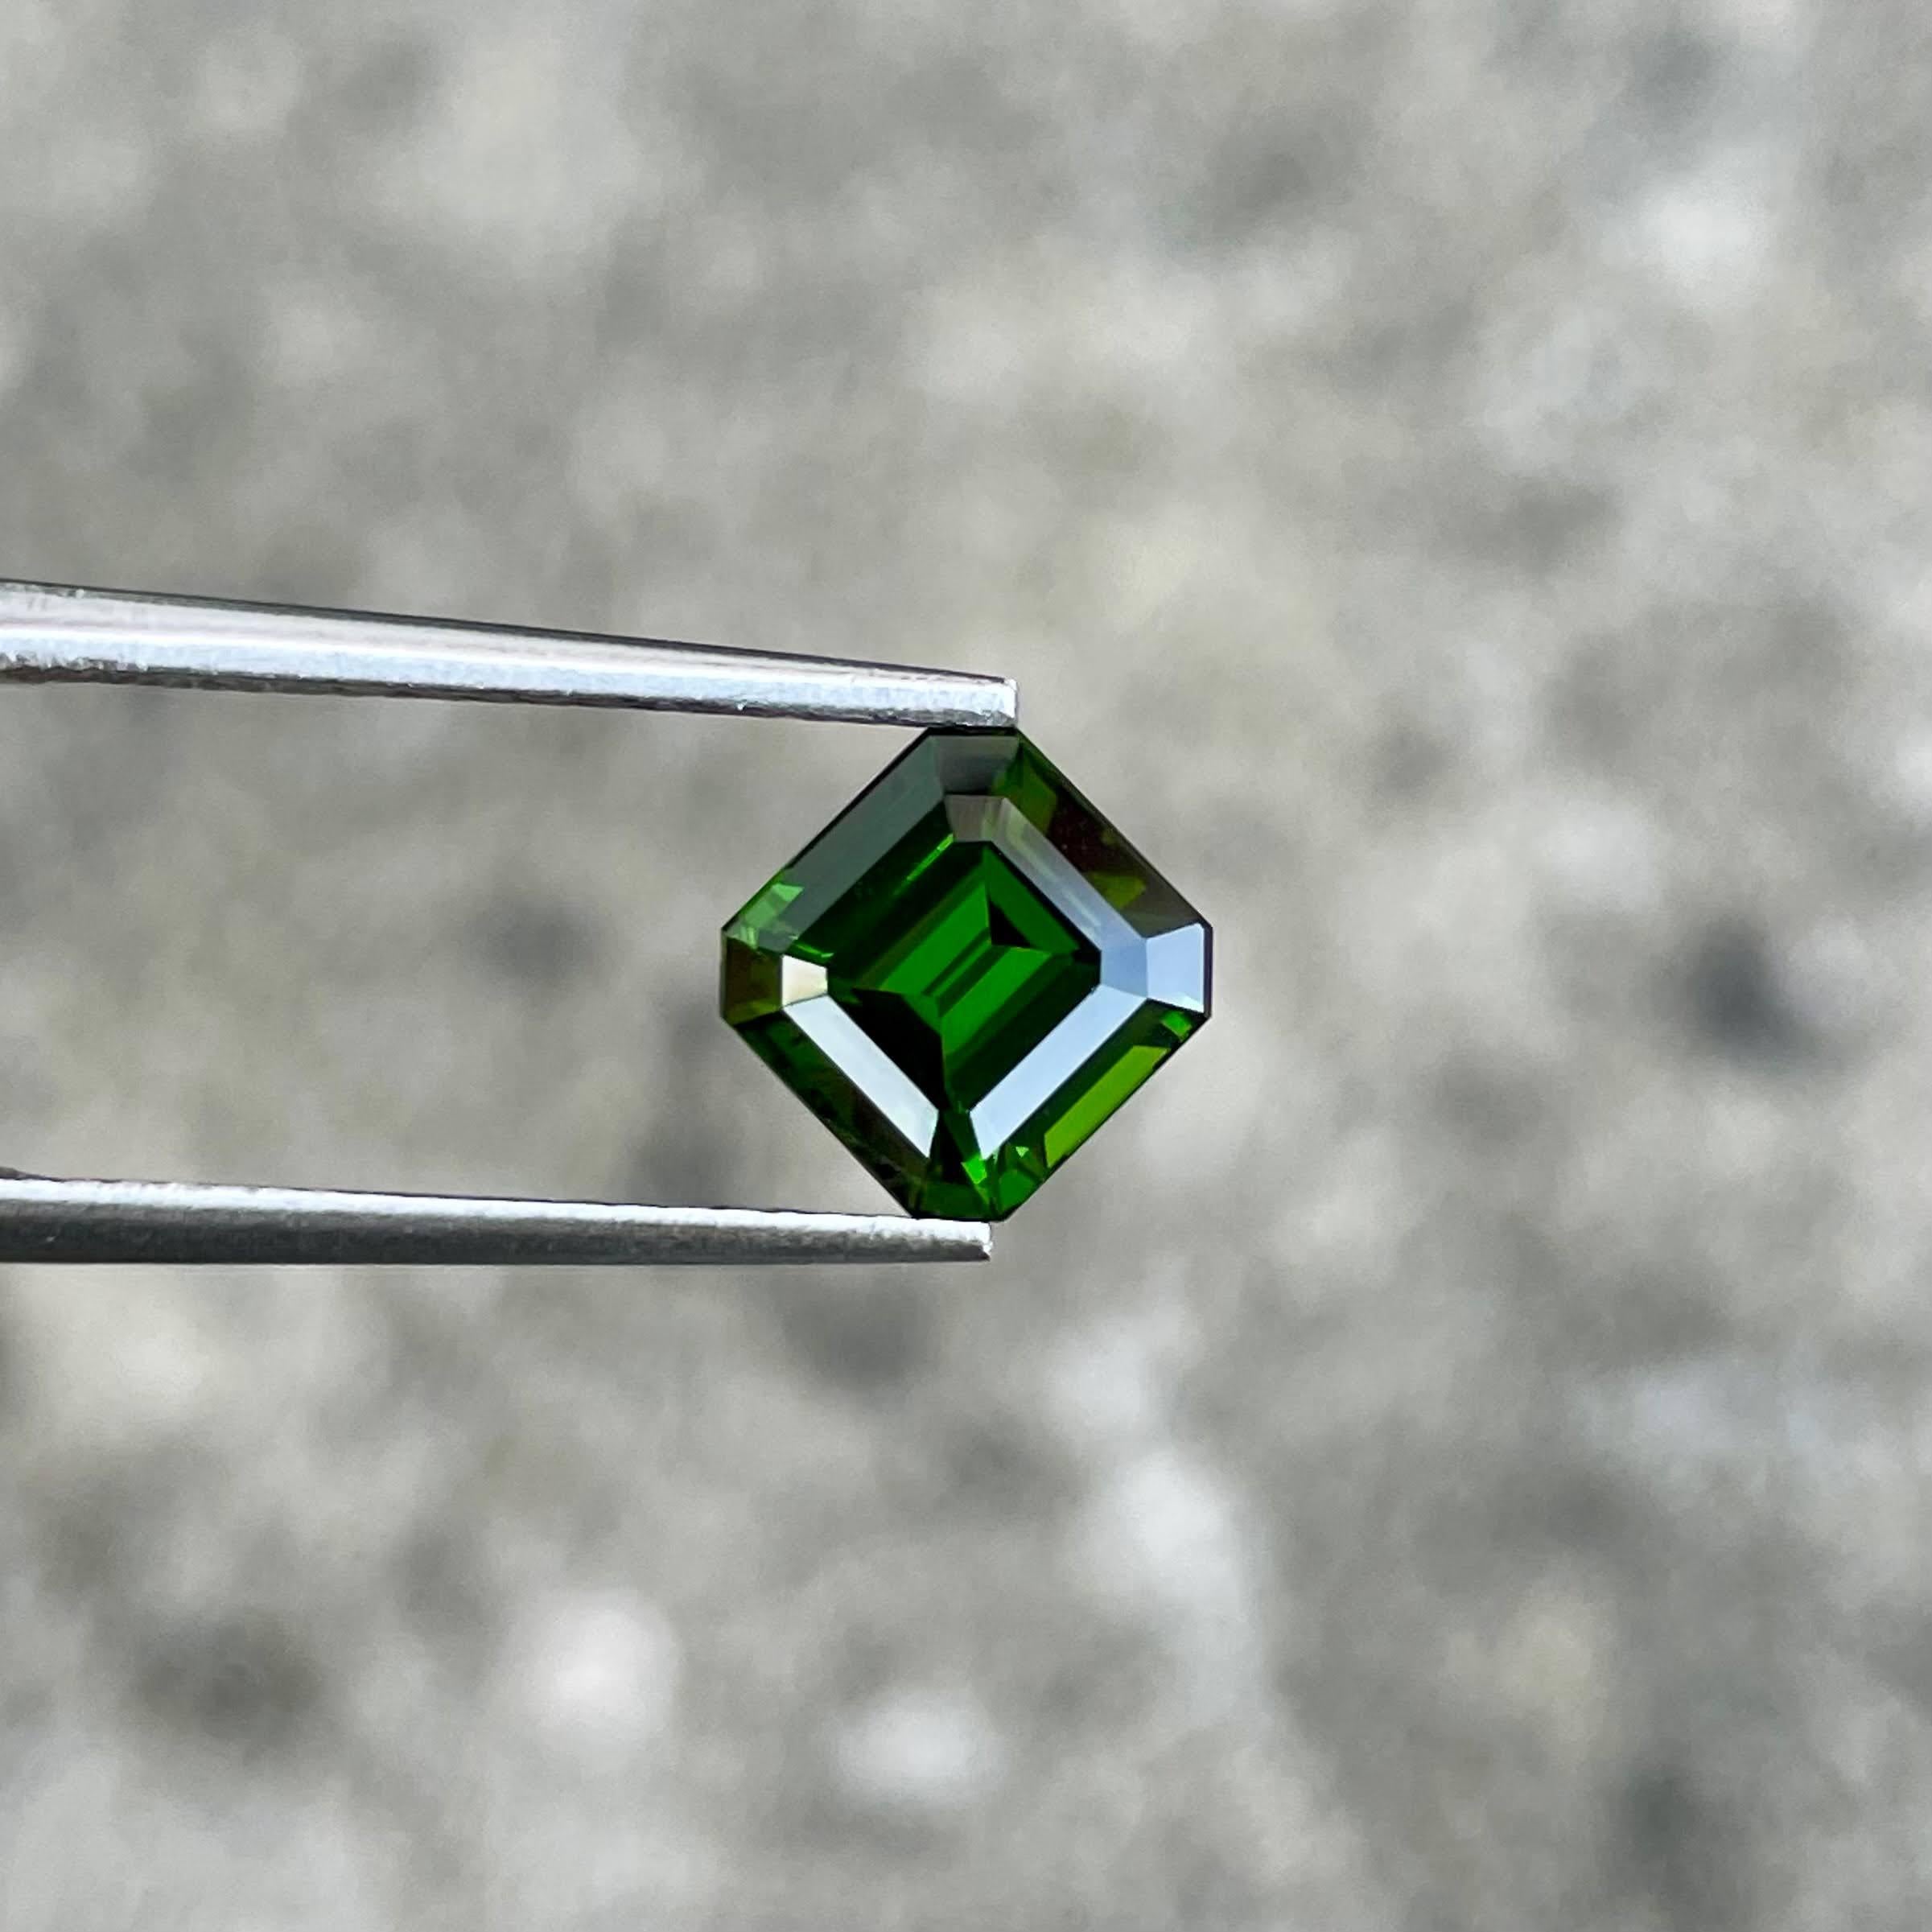 Weight 1.82 carats 
Dimensions 7.25x7.09x4.72 mm
Treatment none 
Origin Tanzania 
Clarity eye clean 
Shape octagon 
Cut emerald




Behold the exquisite allure of a 1.82-carat Green Chrome Tourmaline, resplendent in its Emerald Cut, hailing from the